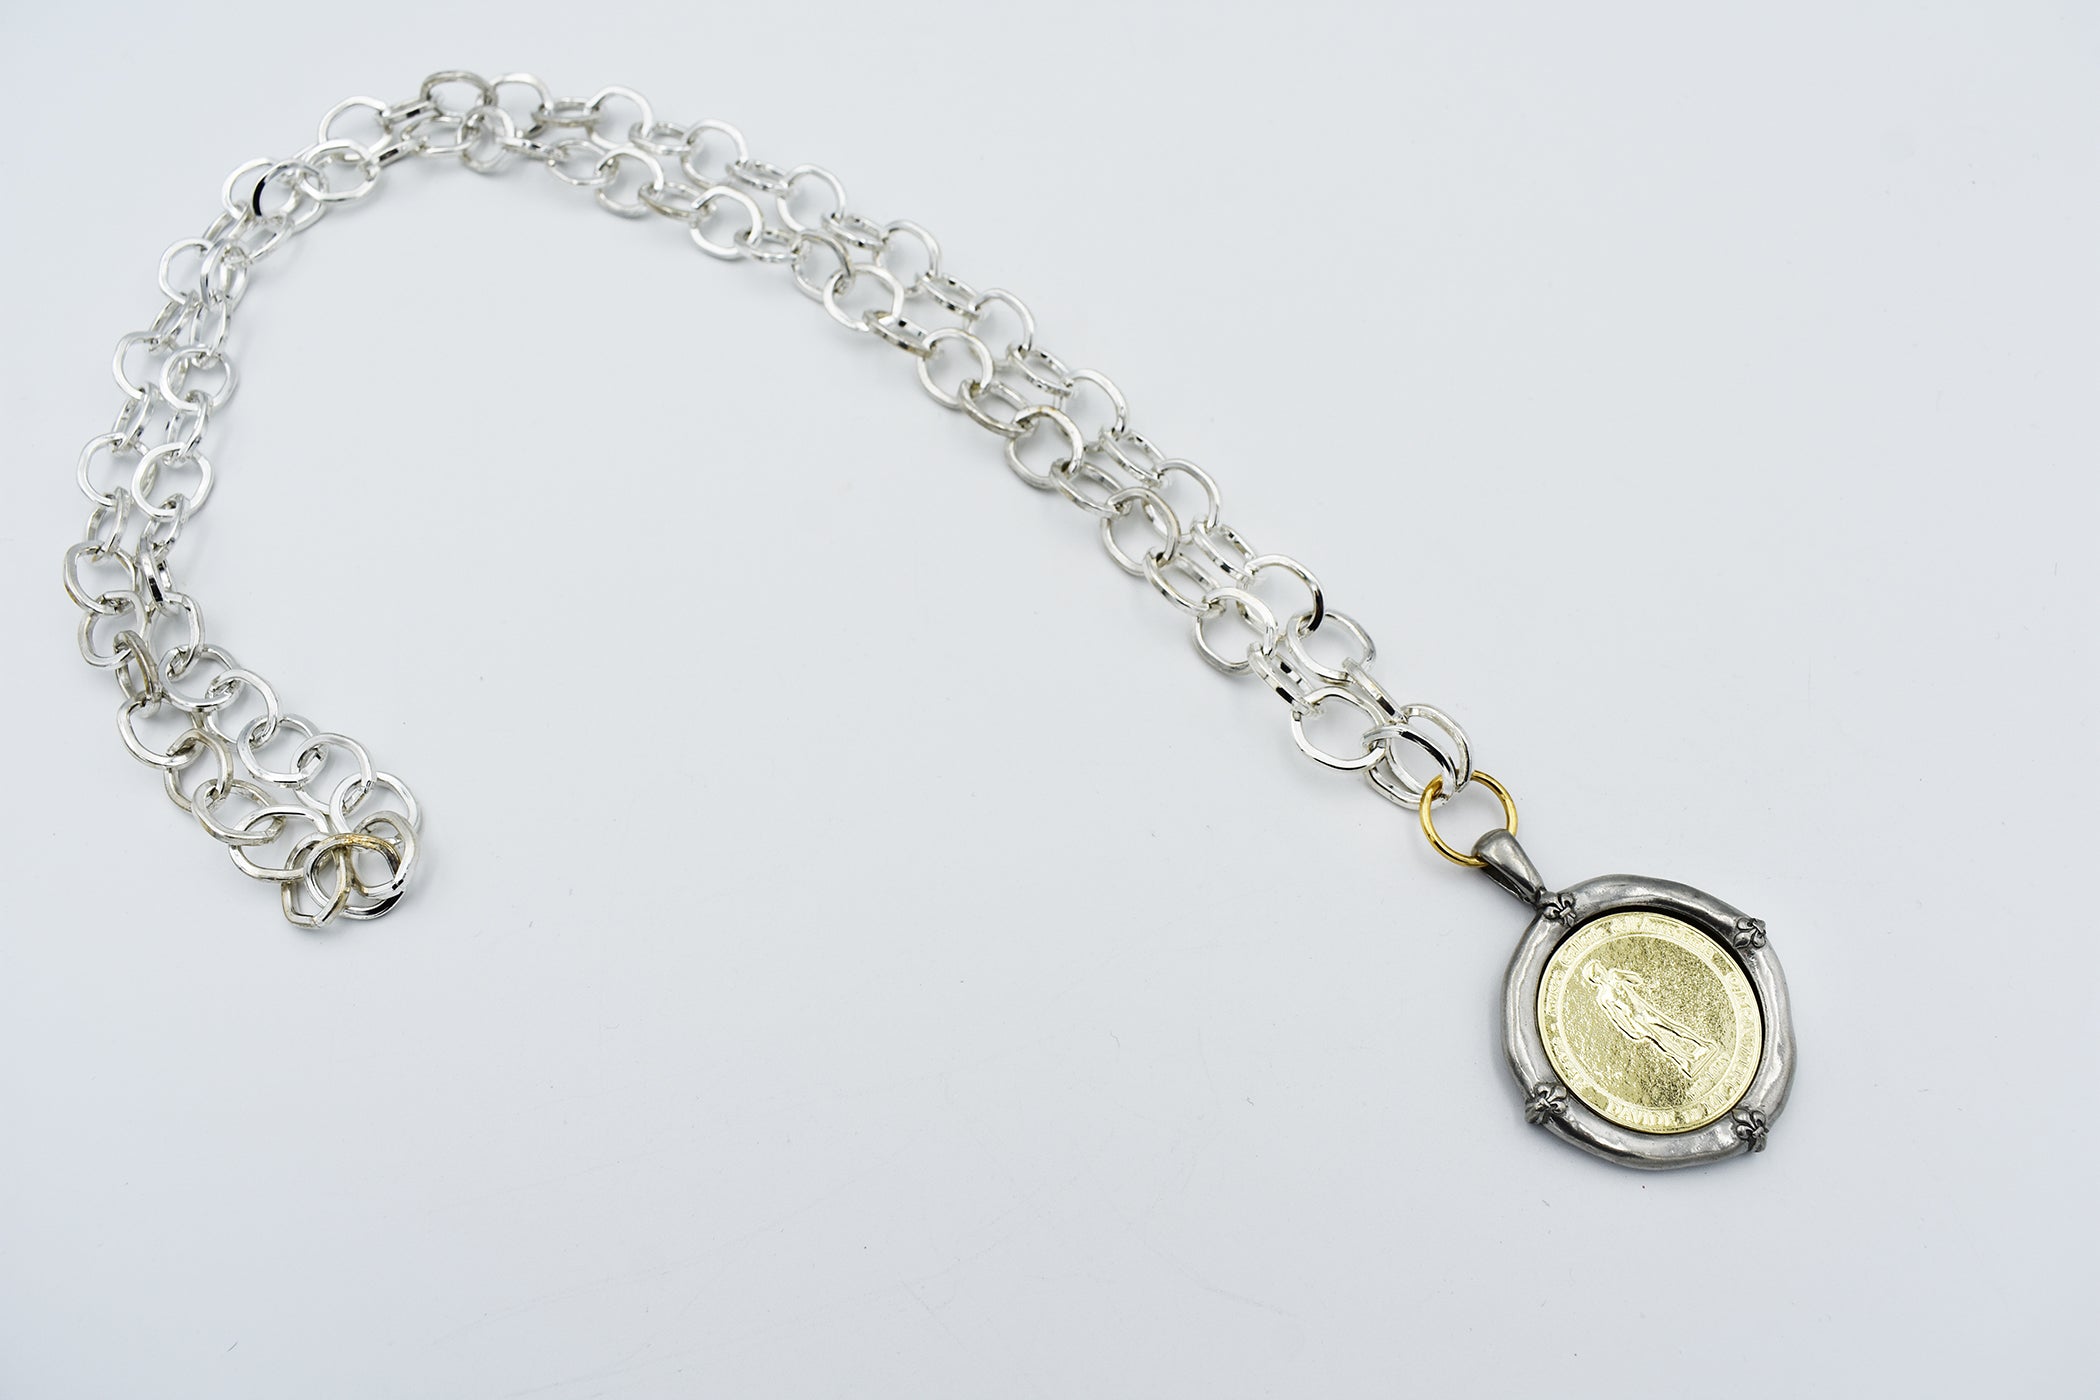 Italian Treasures Collection Silver Chain Necklace with David Coin